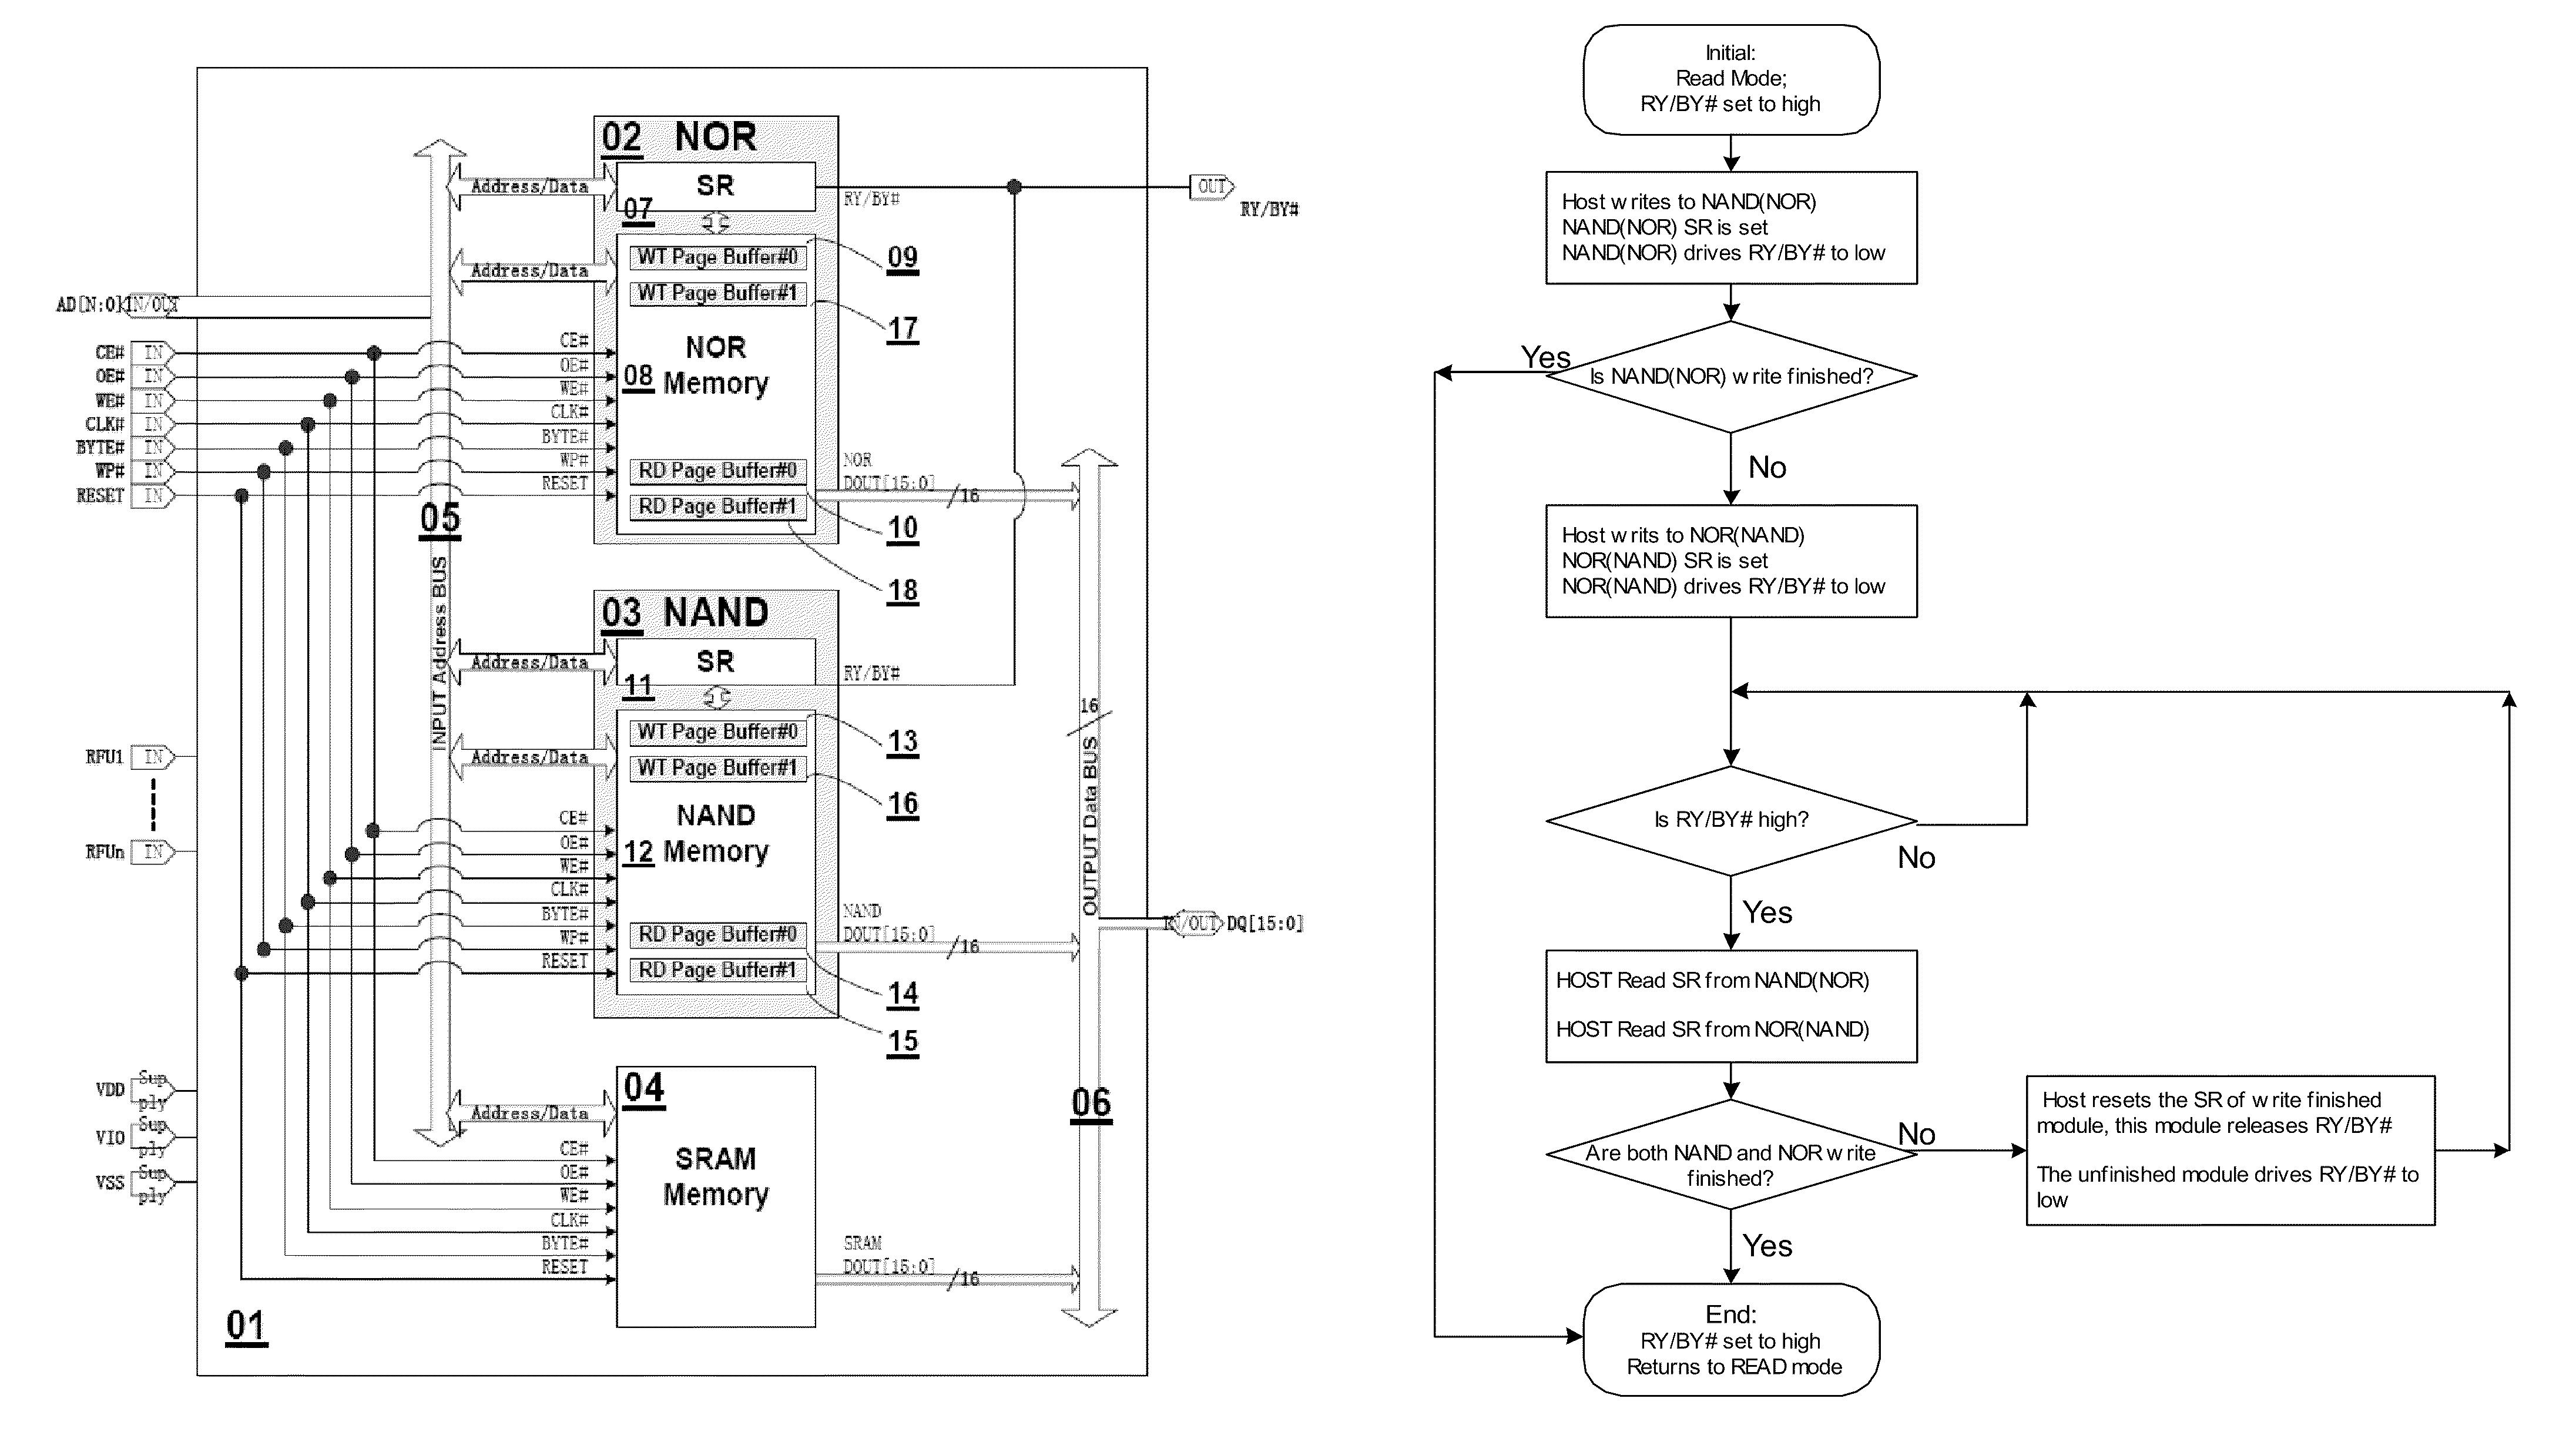 Memory system having NAND-based NOR and NAND flashes and SRAM integrated in one chip for hybrid data, code and cache storage